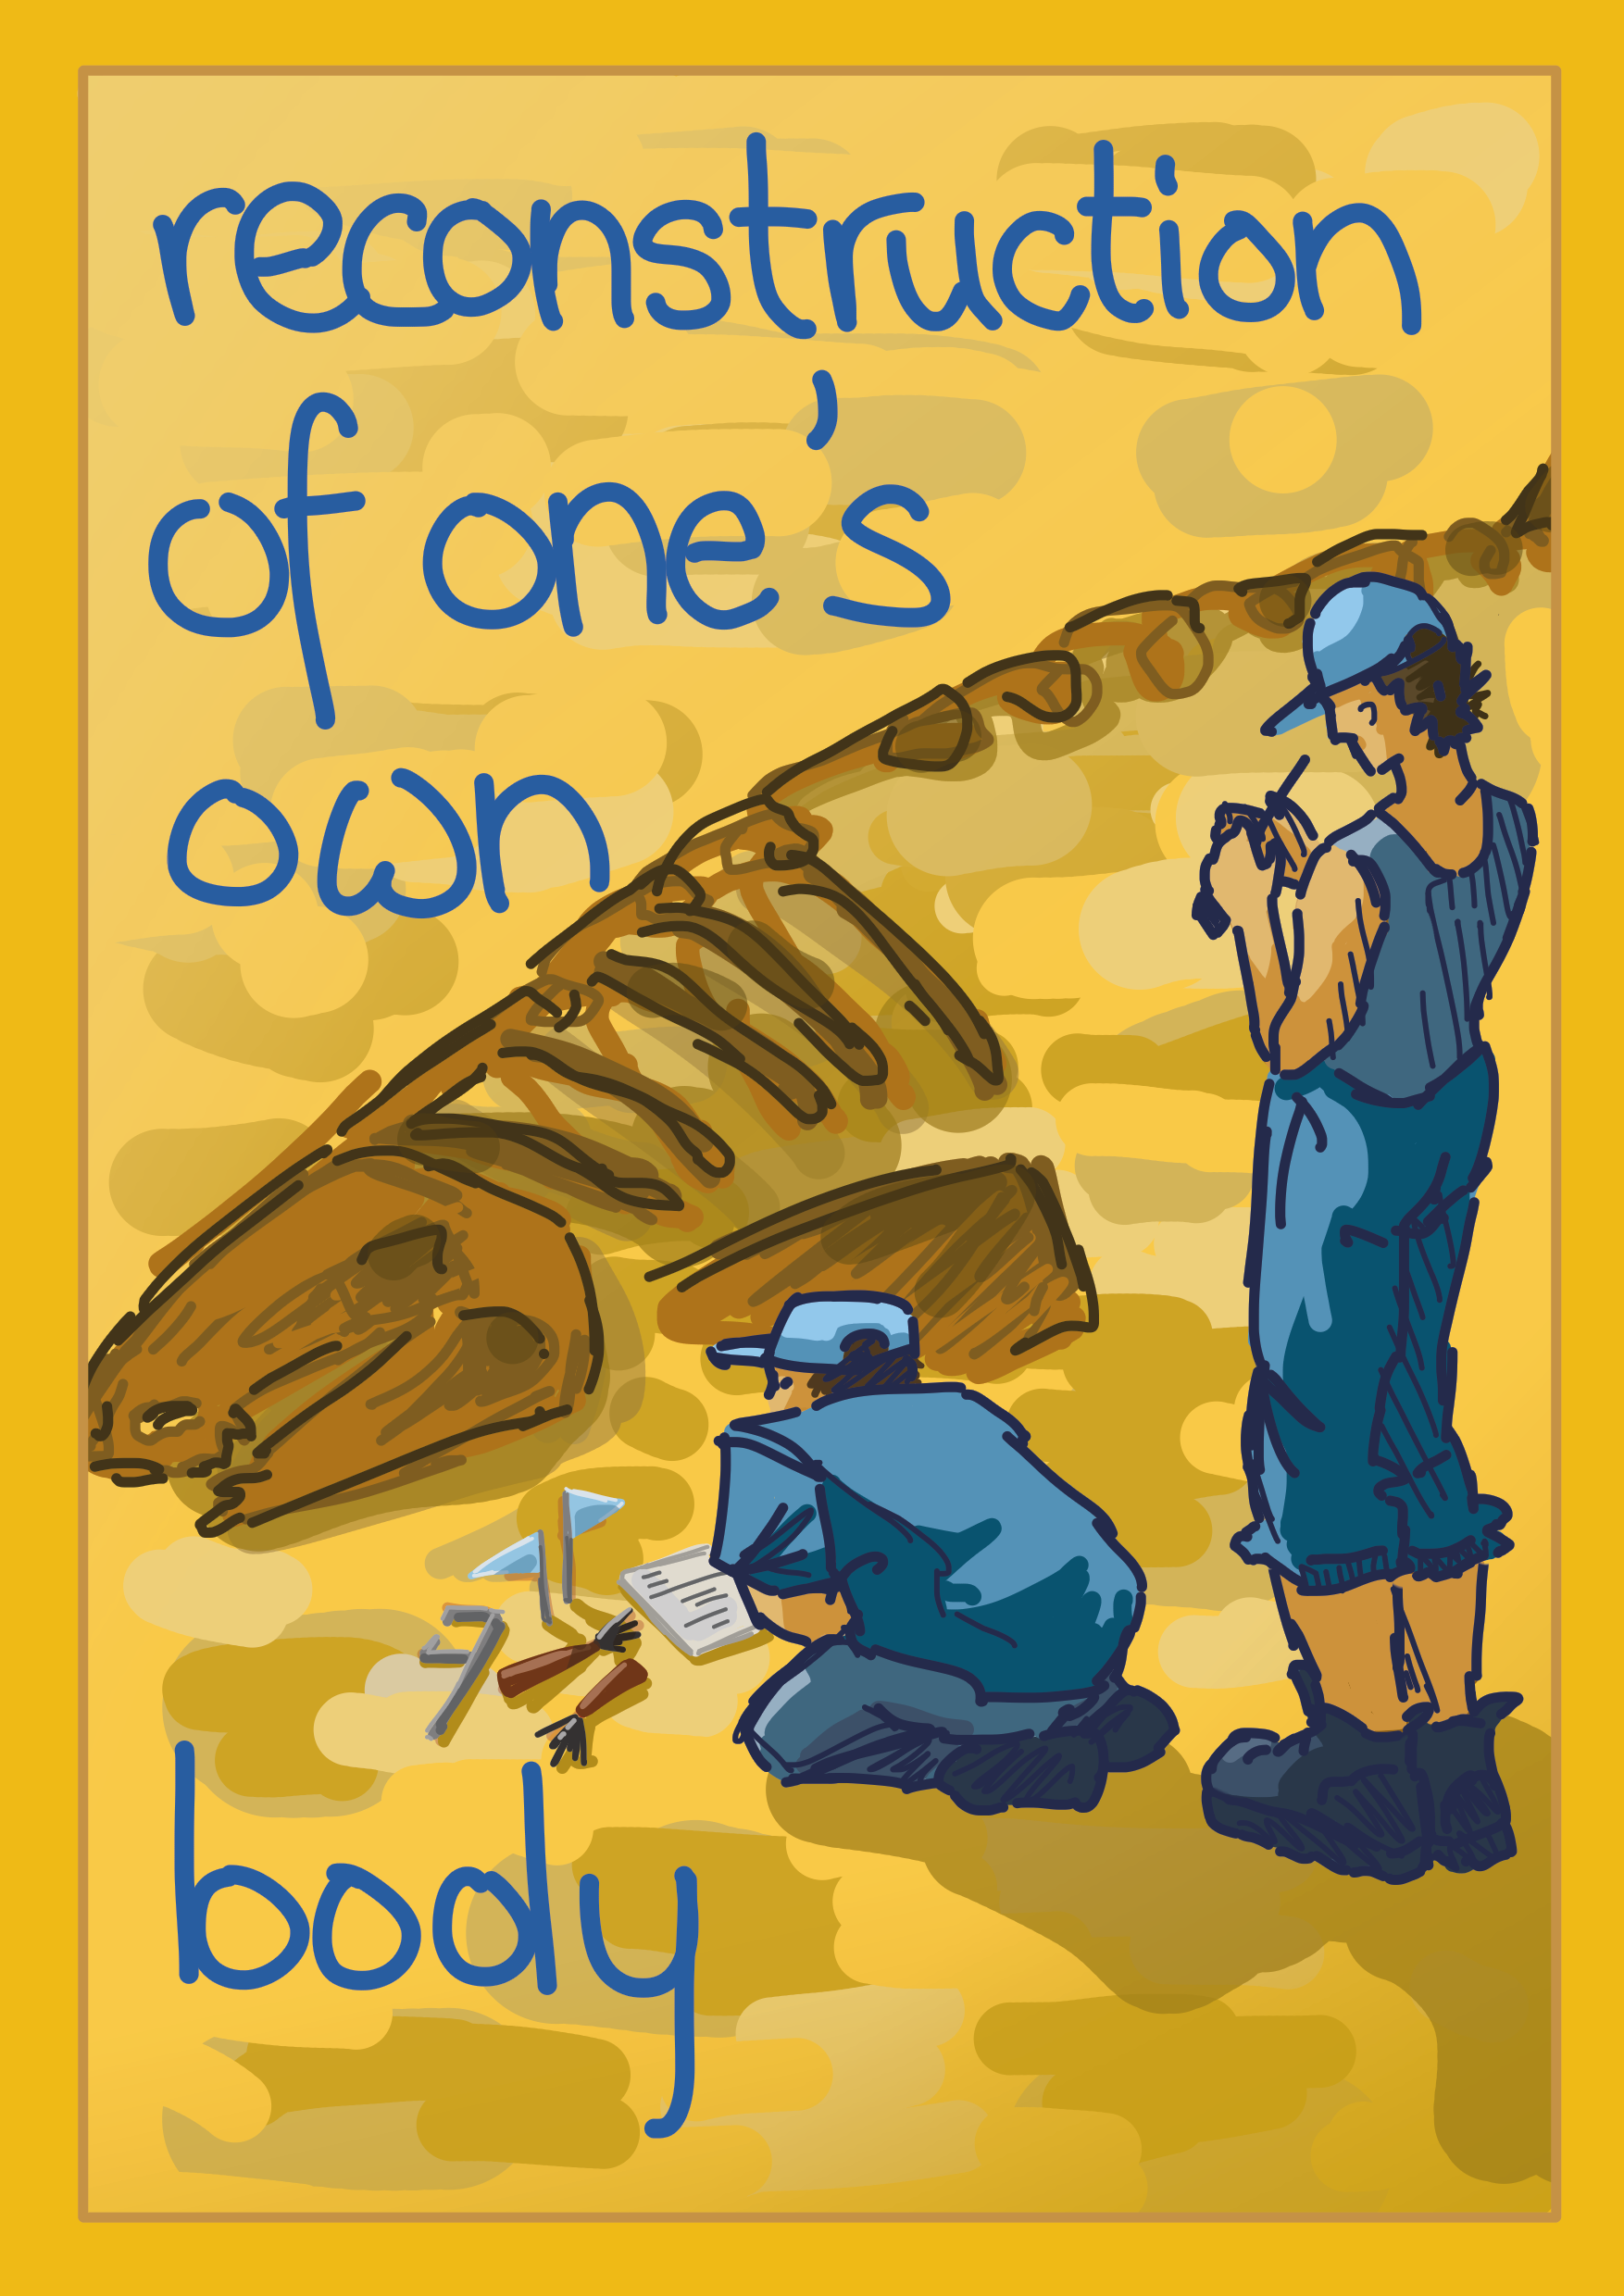 Page eight: An archeological digging site. Two people, one kneeling in front of their equipment, one standing with a walkie-talkie, ogle the bones of a sixgill bluntnose shark laying in the yellow sand. Text reads: reconstruction of one's own body.